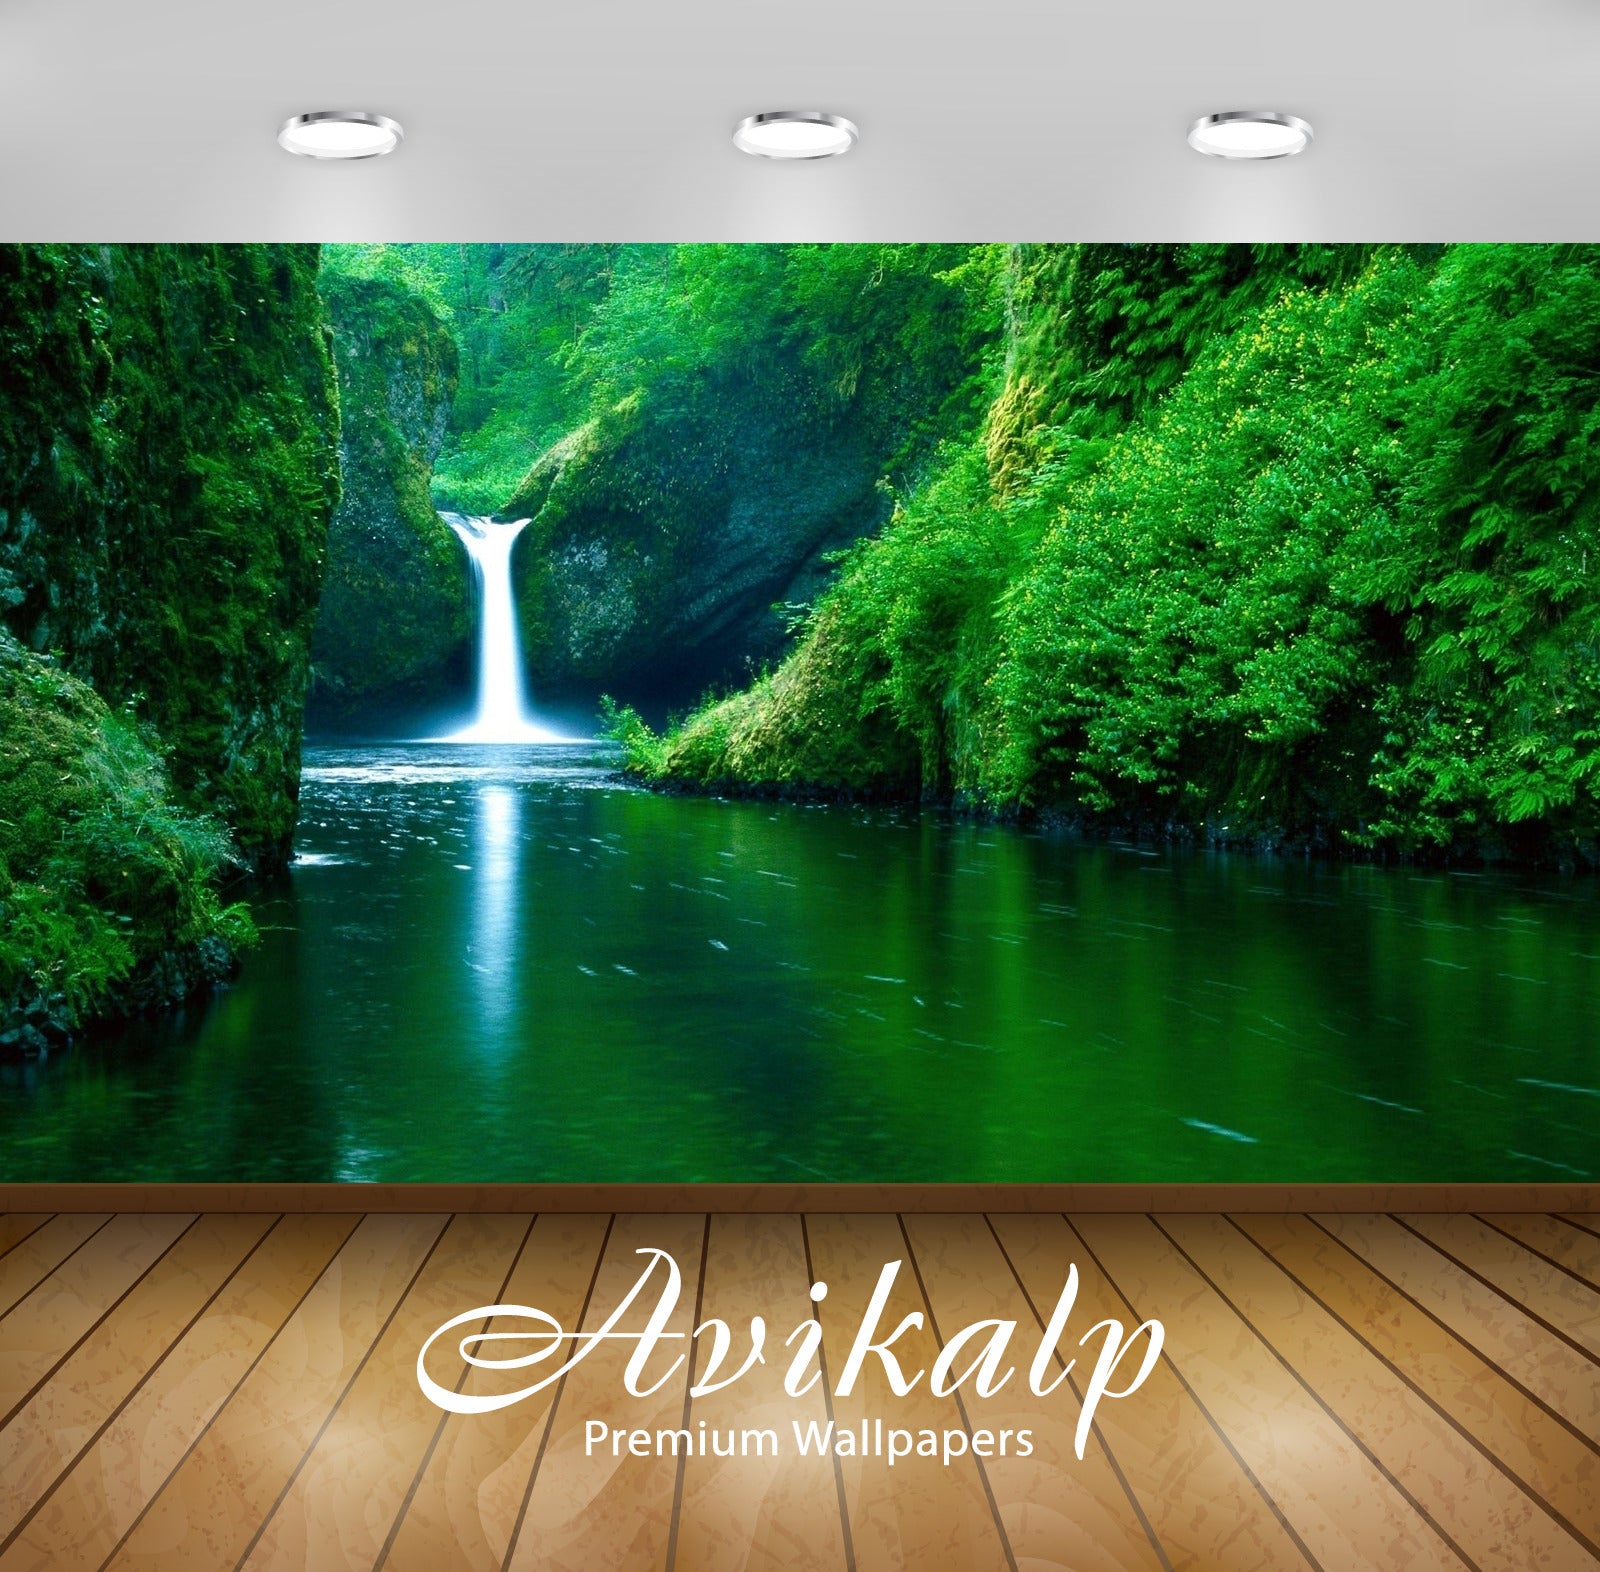 Avikalp Exclusive Waterfall Lake Greenery Nature AWI1250 HD Wallpapers for Living room, Hall, Kids R